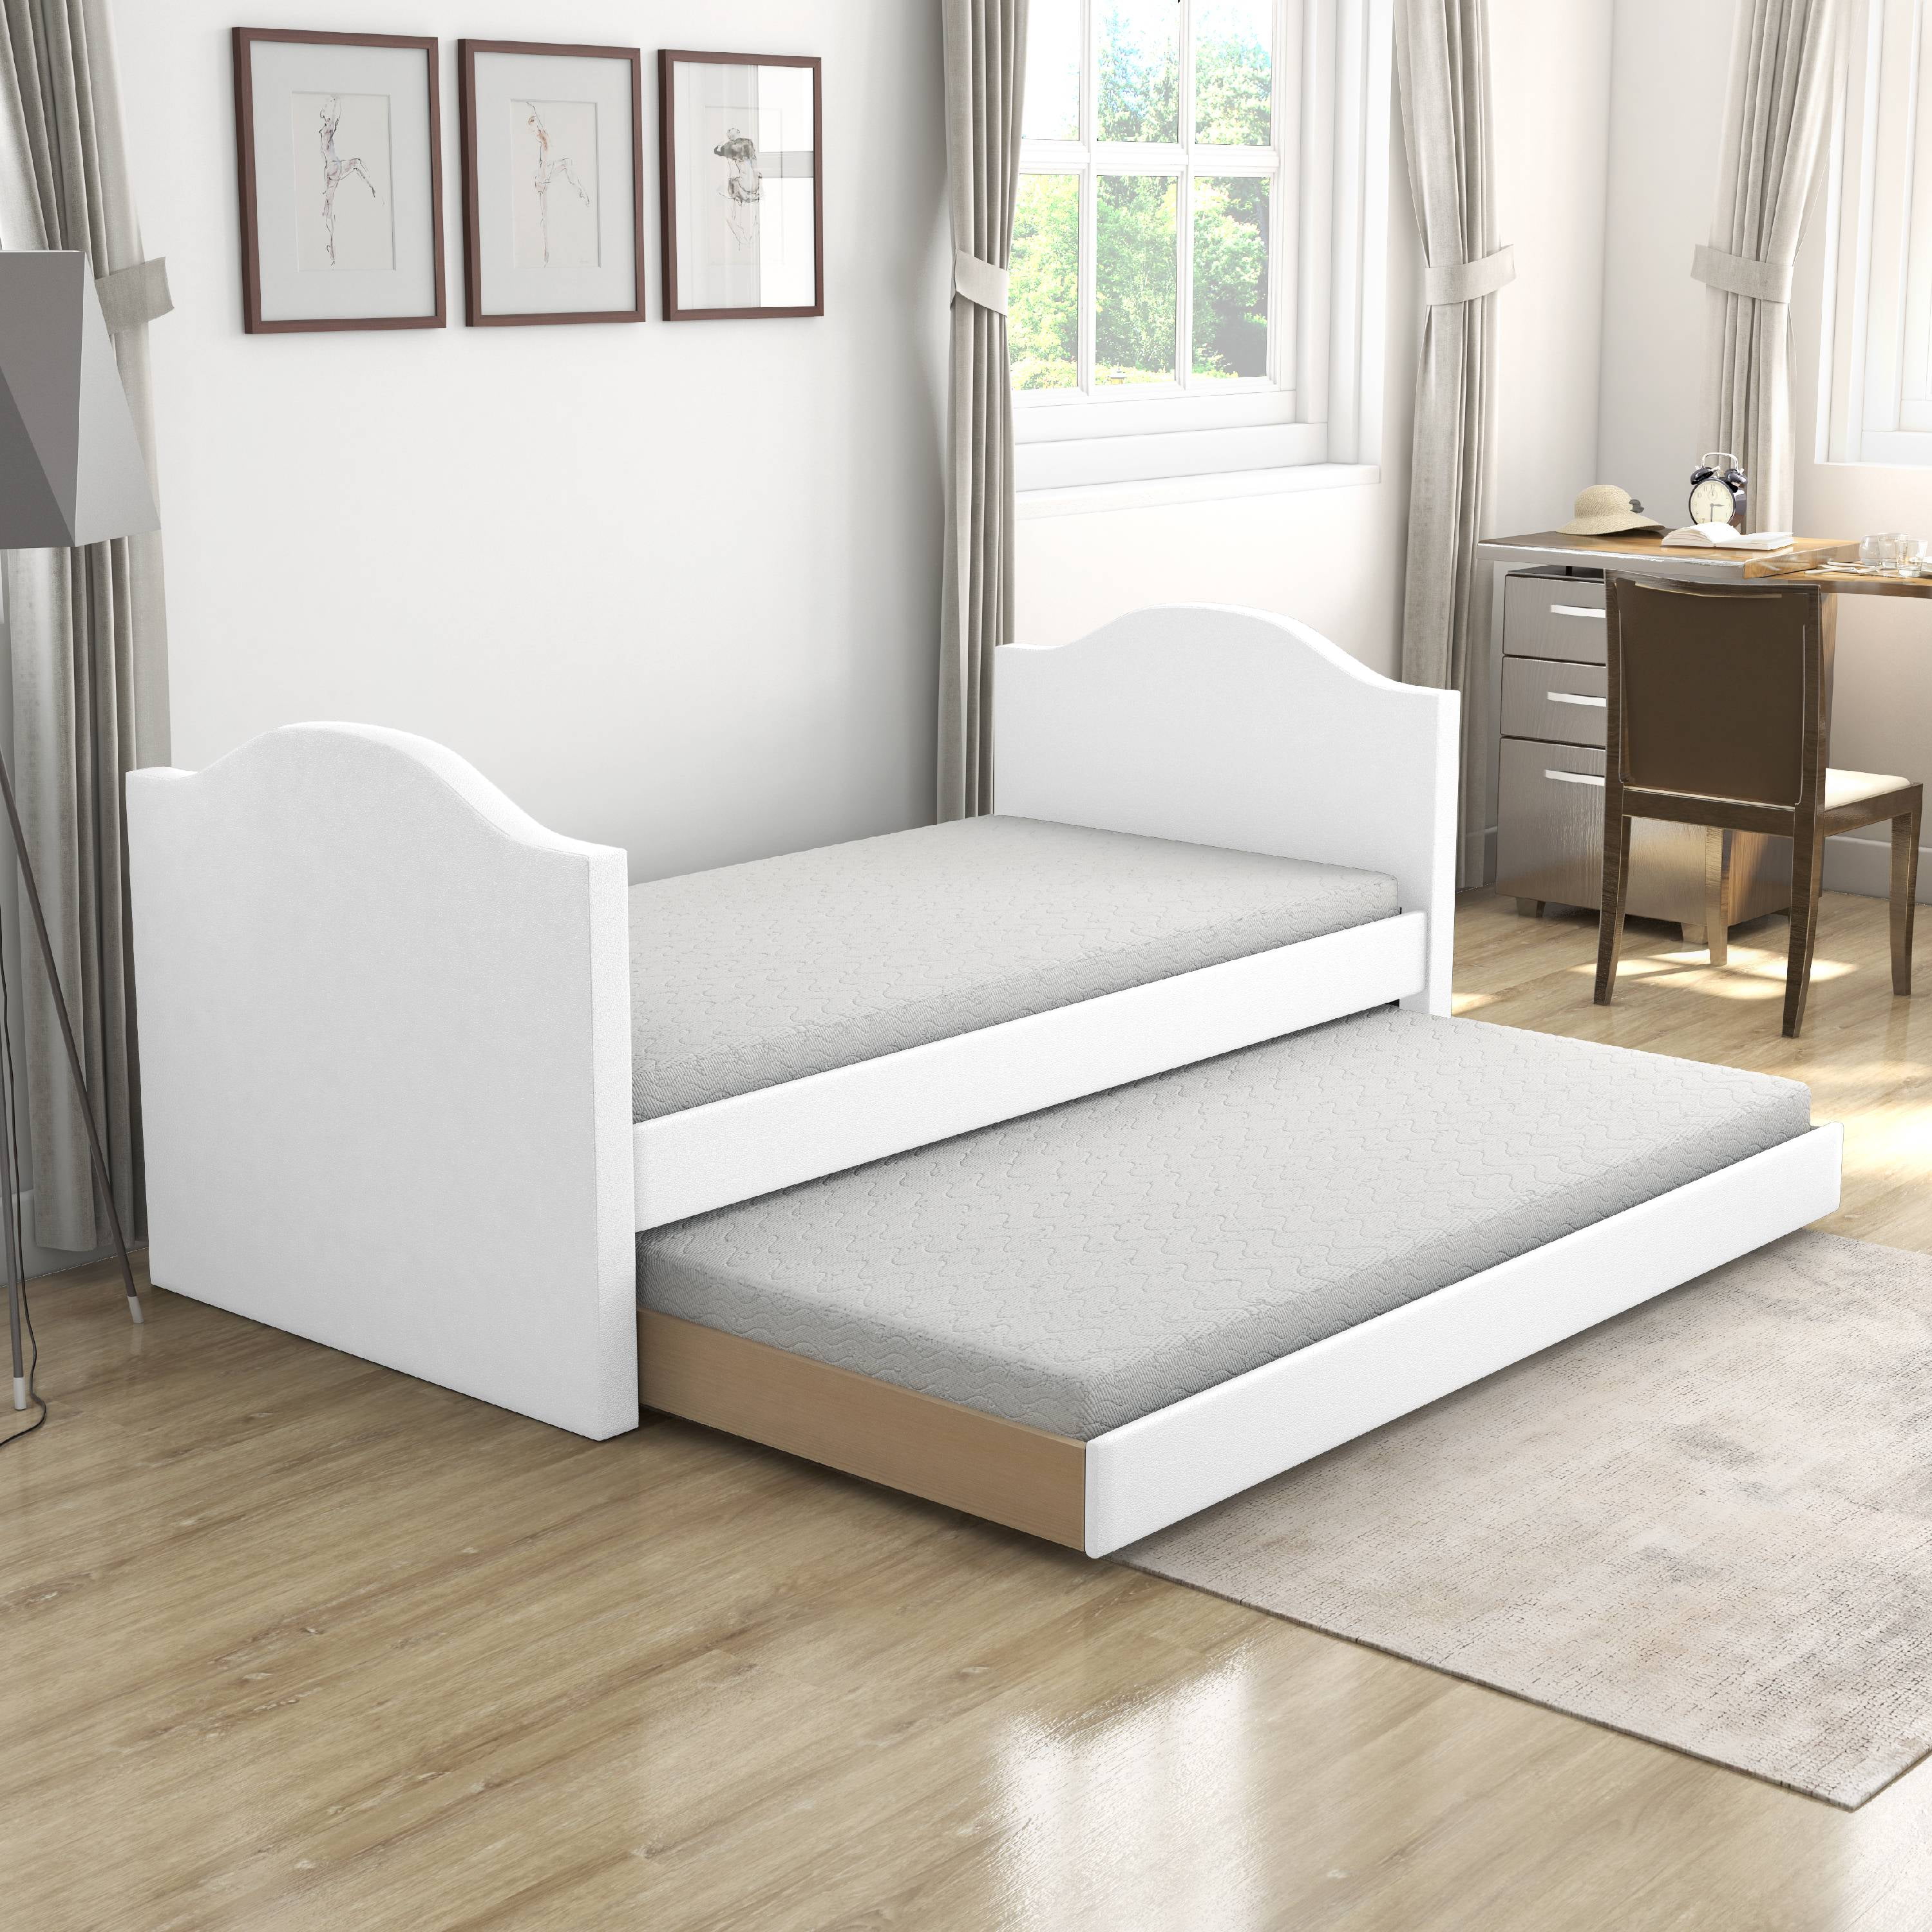 Premier Melissa White Upholstered Faux, Leather Trundle Beds